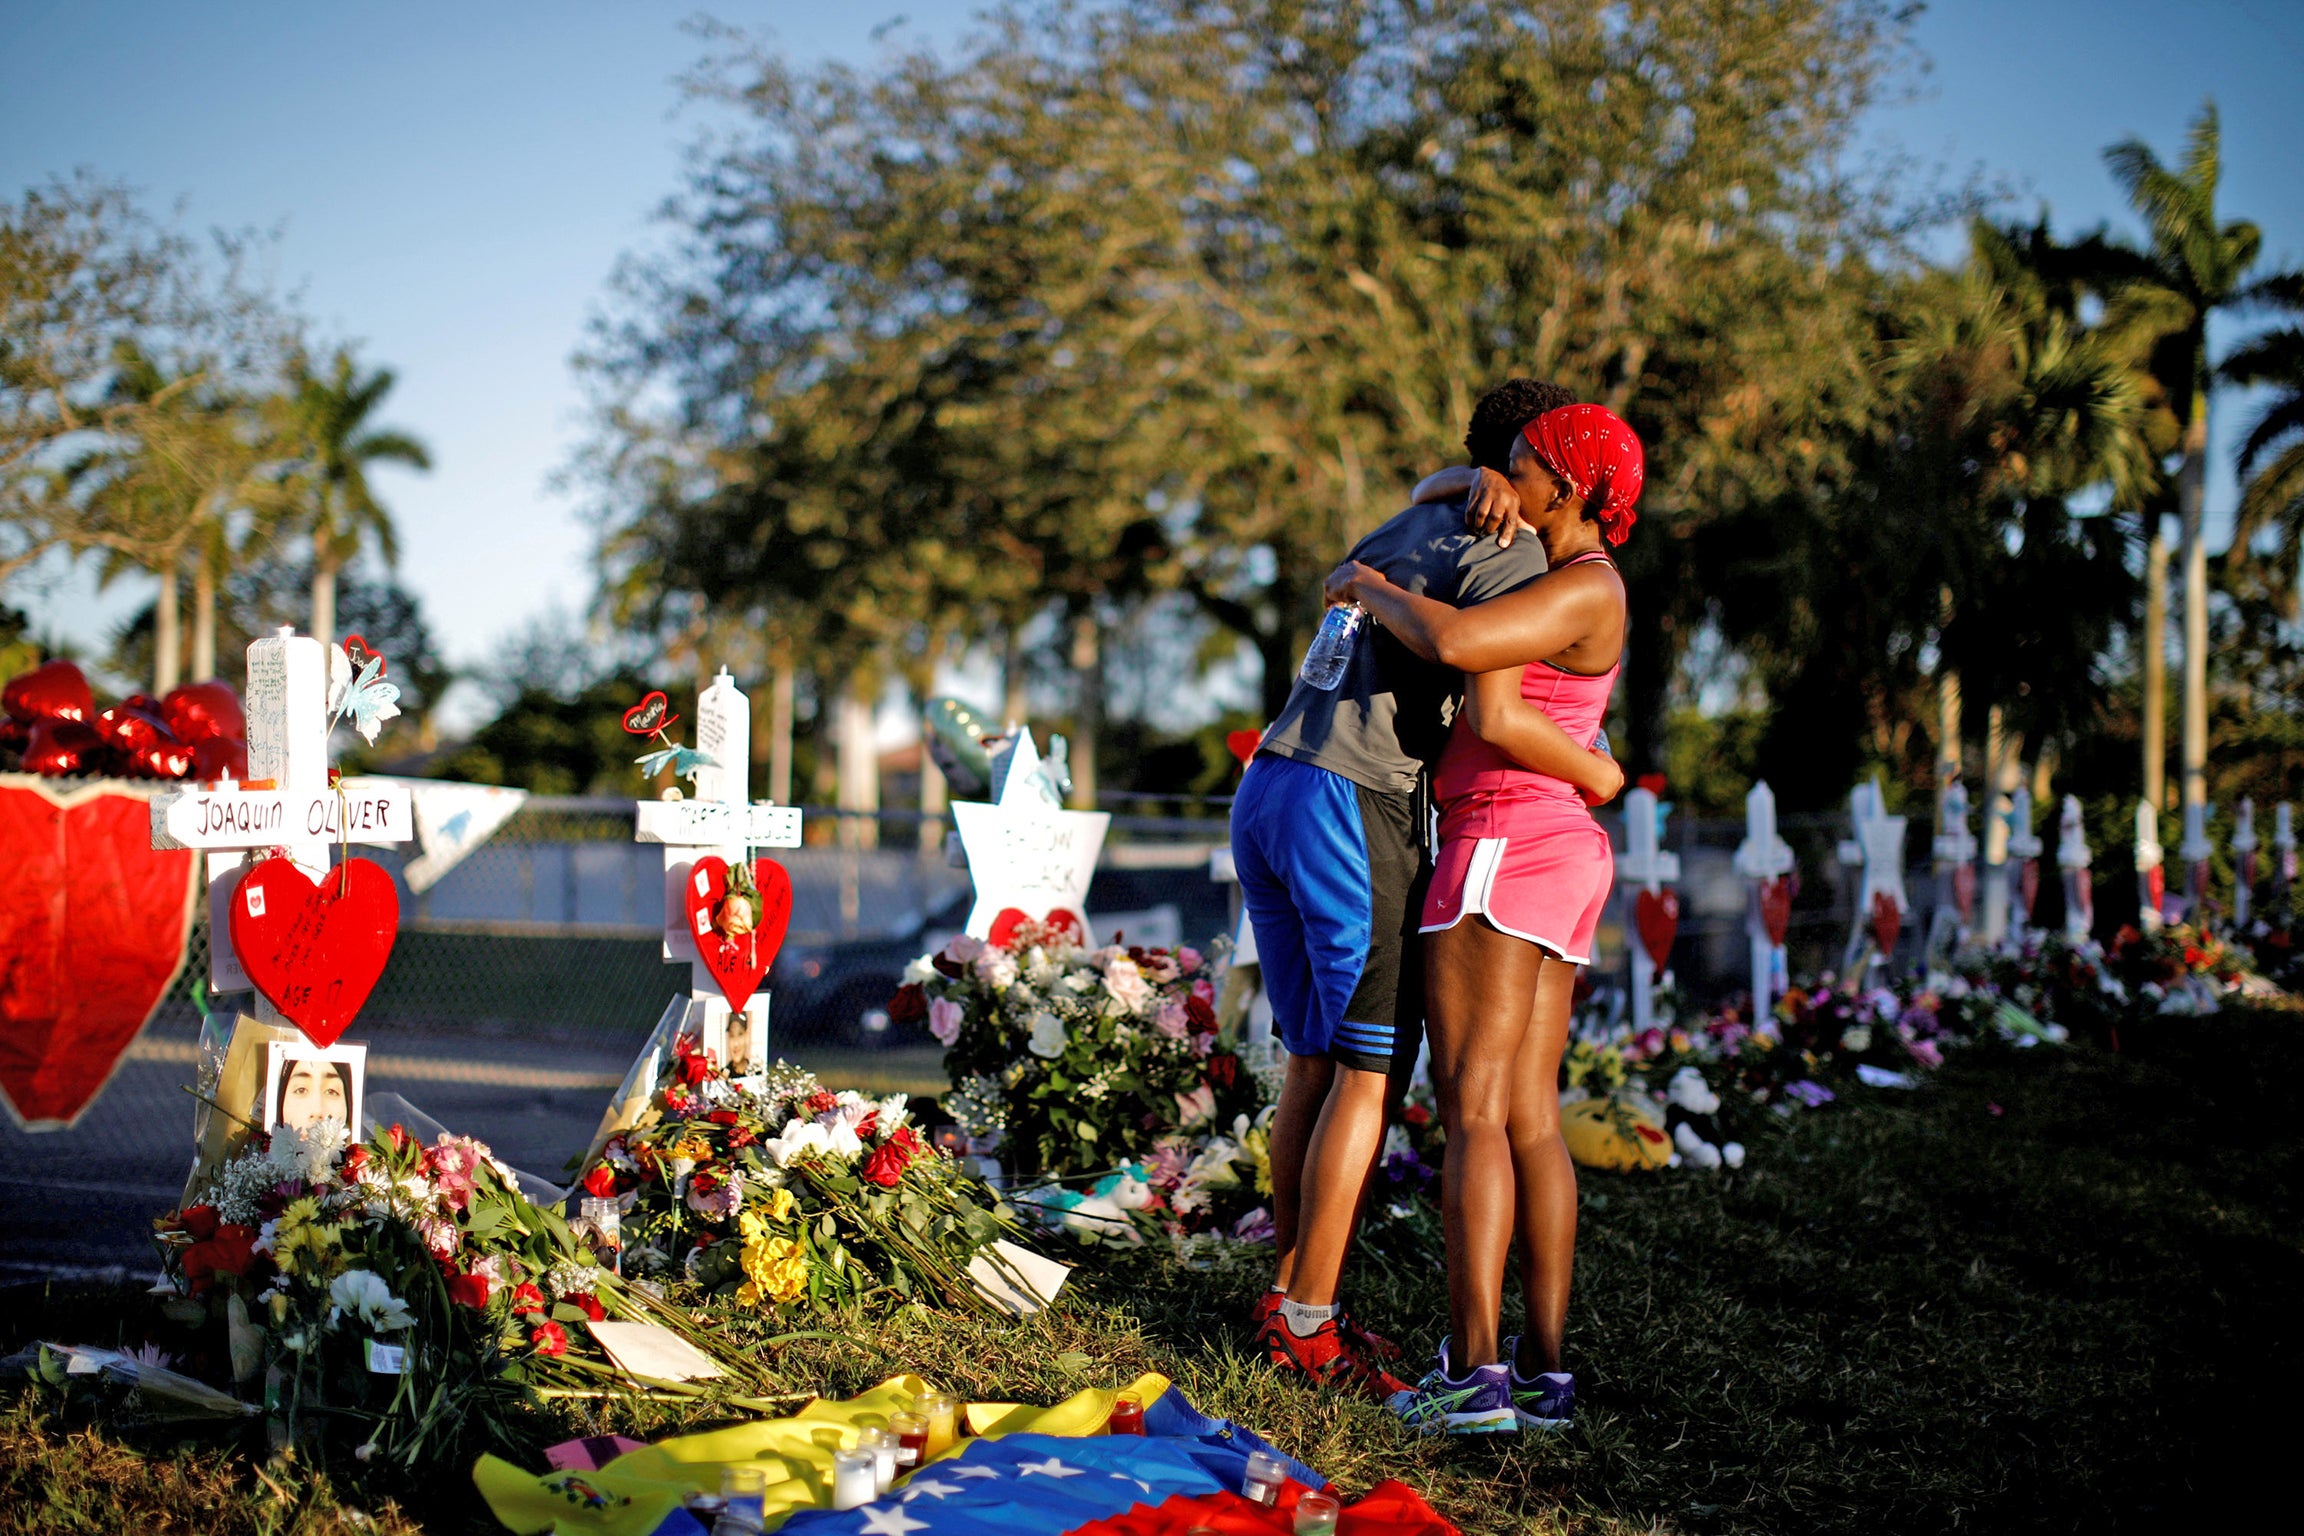 Mourners at a vigil in Parkland, Florida following the February shooting